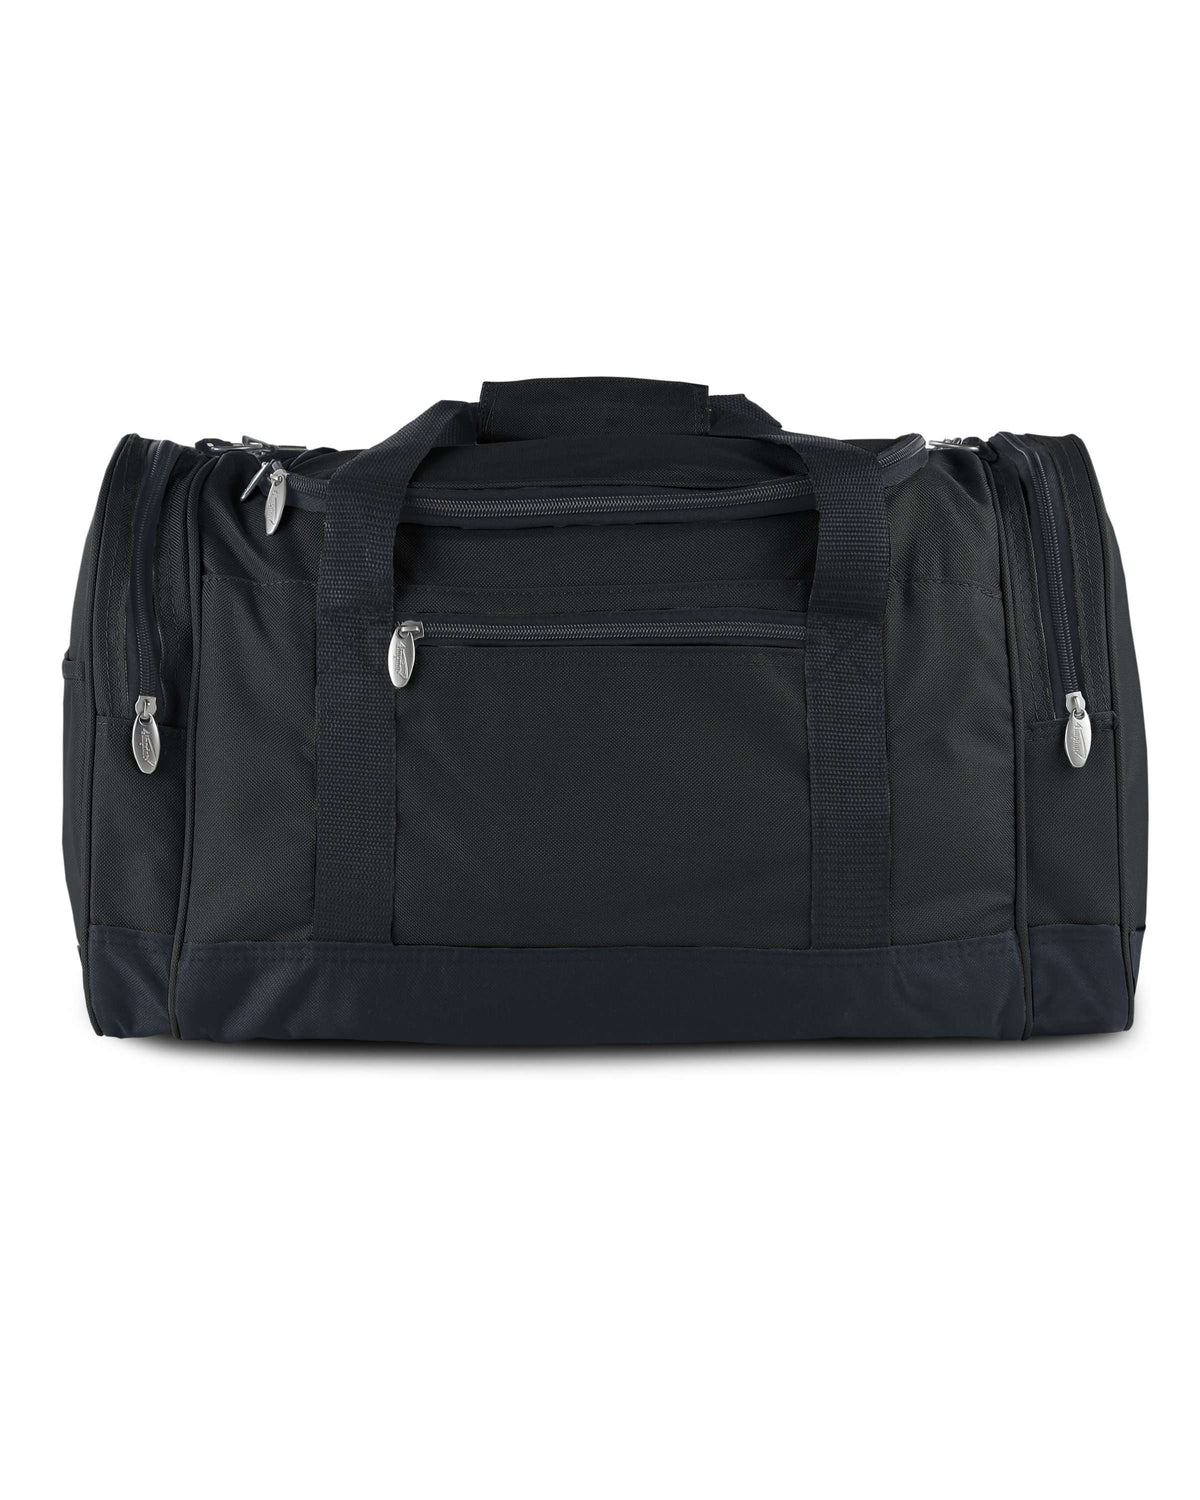 Giovanni Gym Bag | Shop Luxury Bedding and Bath at Luxor Linens